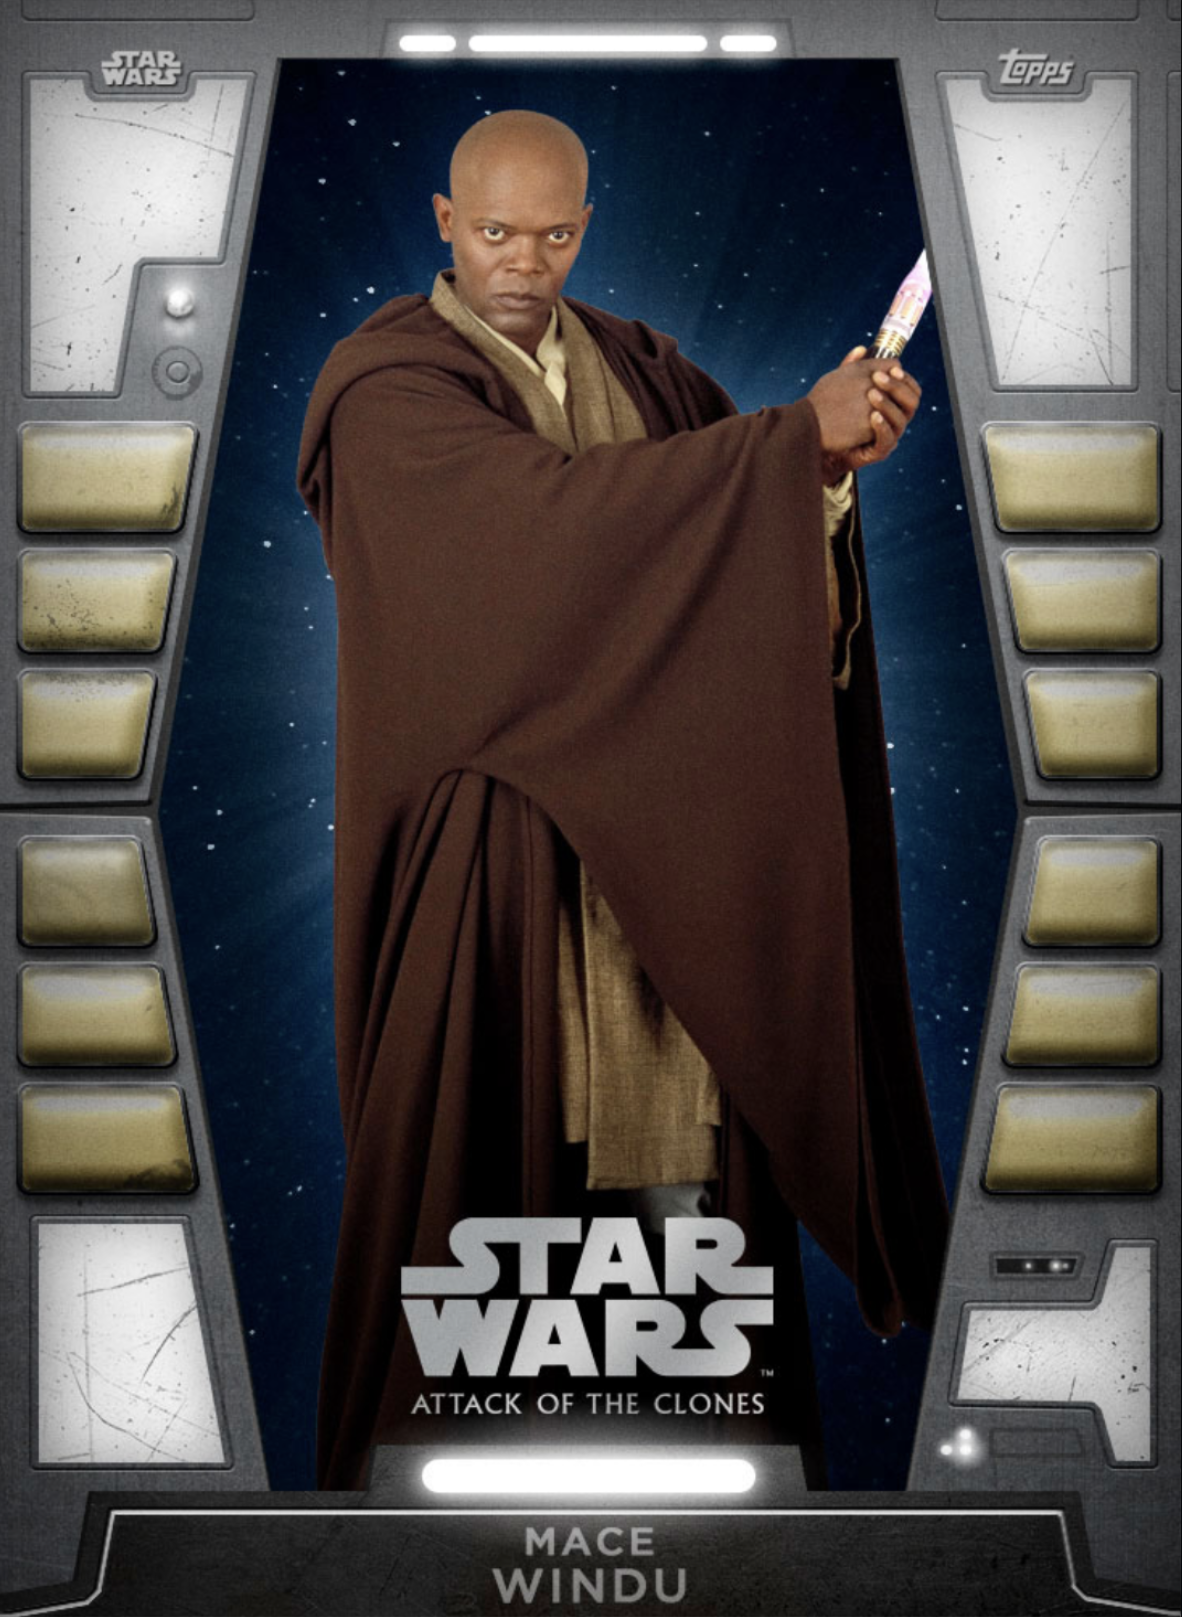 2019 Life Day Topps Digital Star Wars Card Trader Chewbacca White Variant 